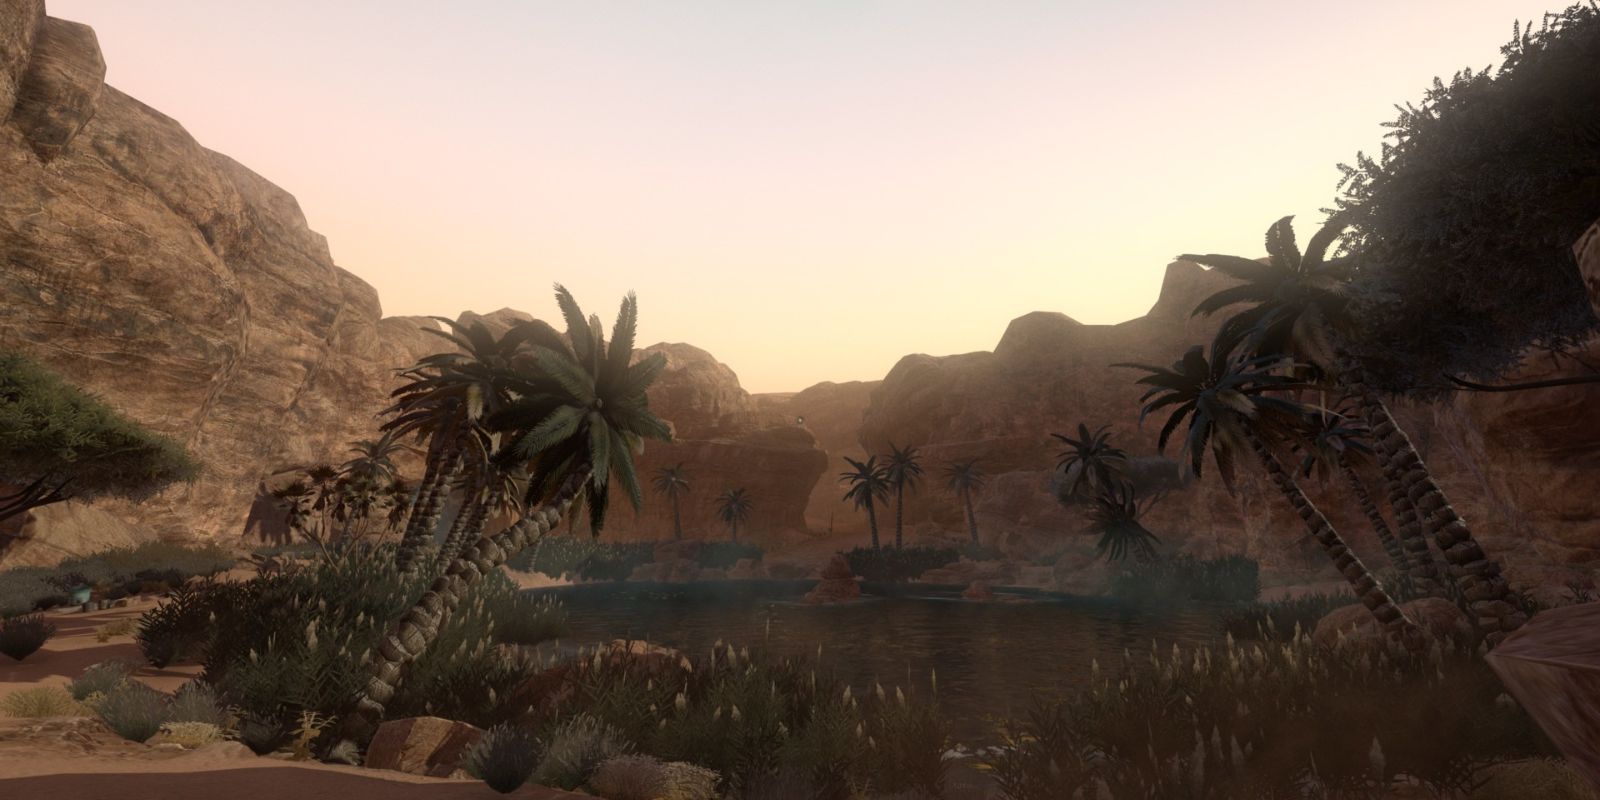 A beautiful Oasis in the desert.